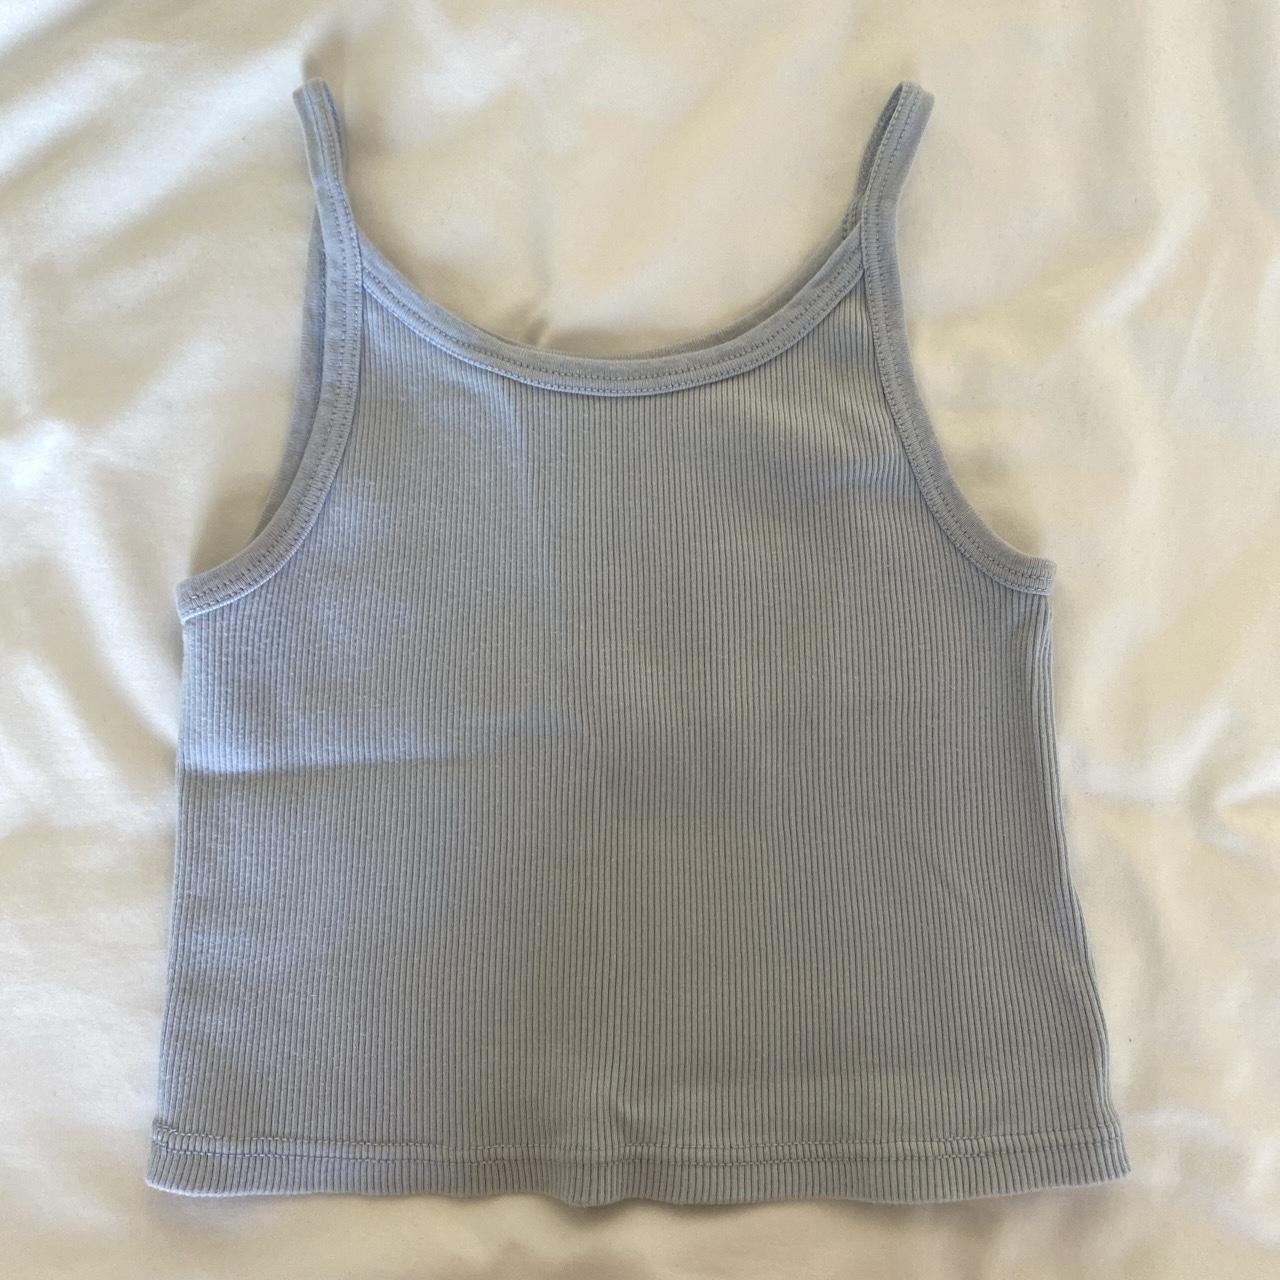 Brandy Melville Heather Gray Ribbed Tank Top Crop XS/S